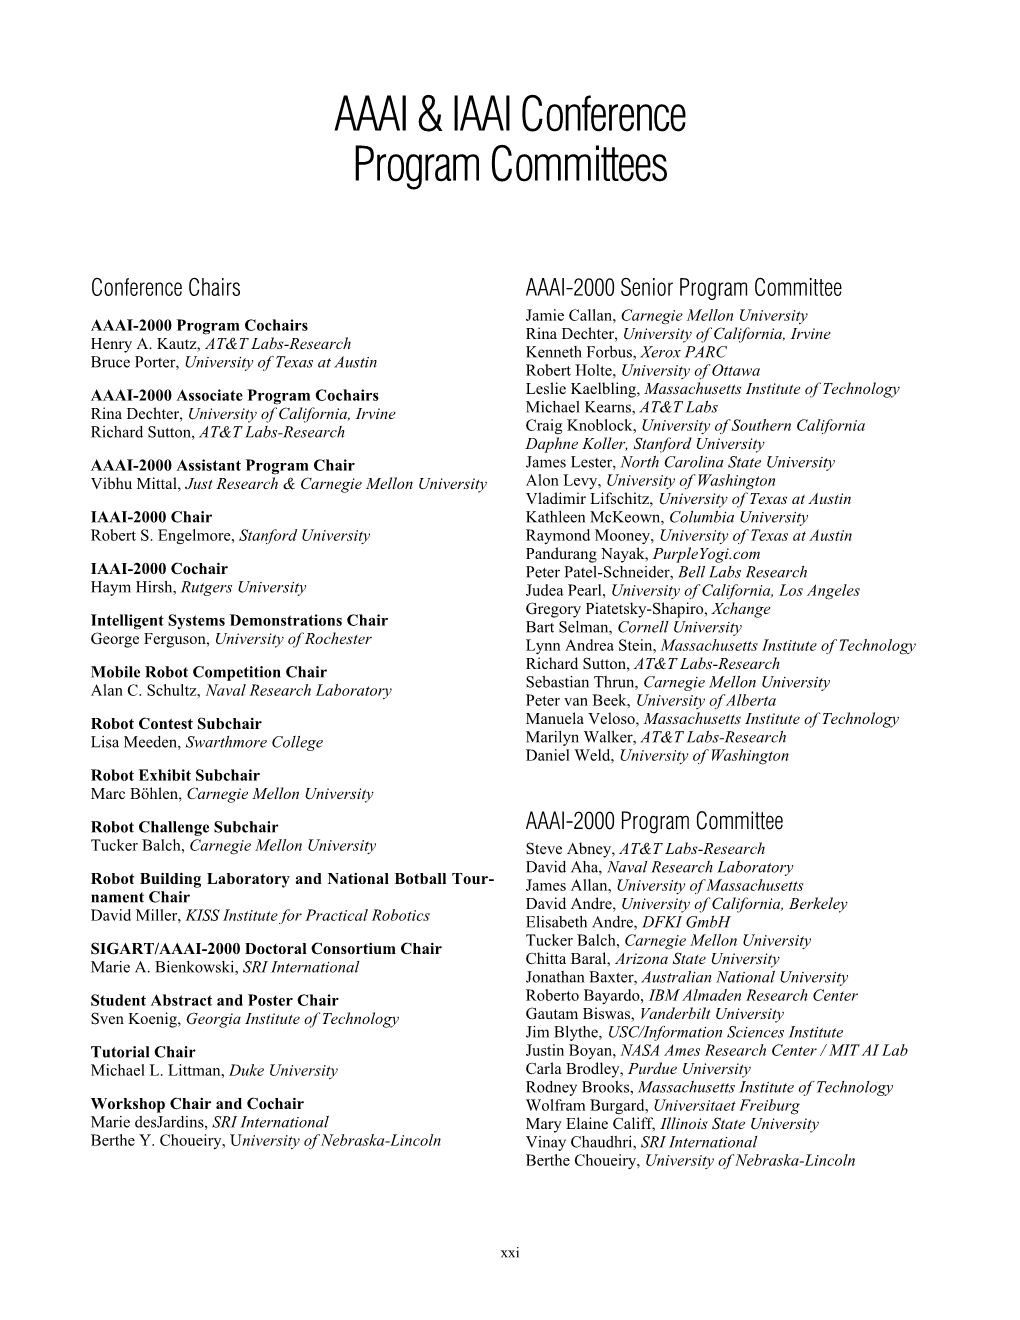 Conference Organizers and Program Committee